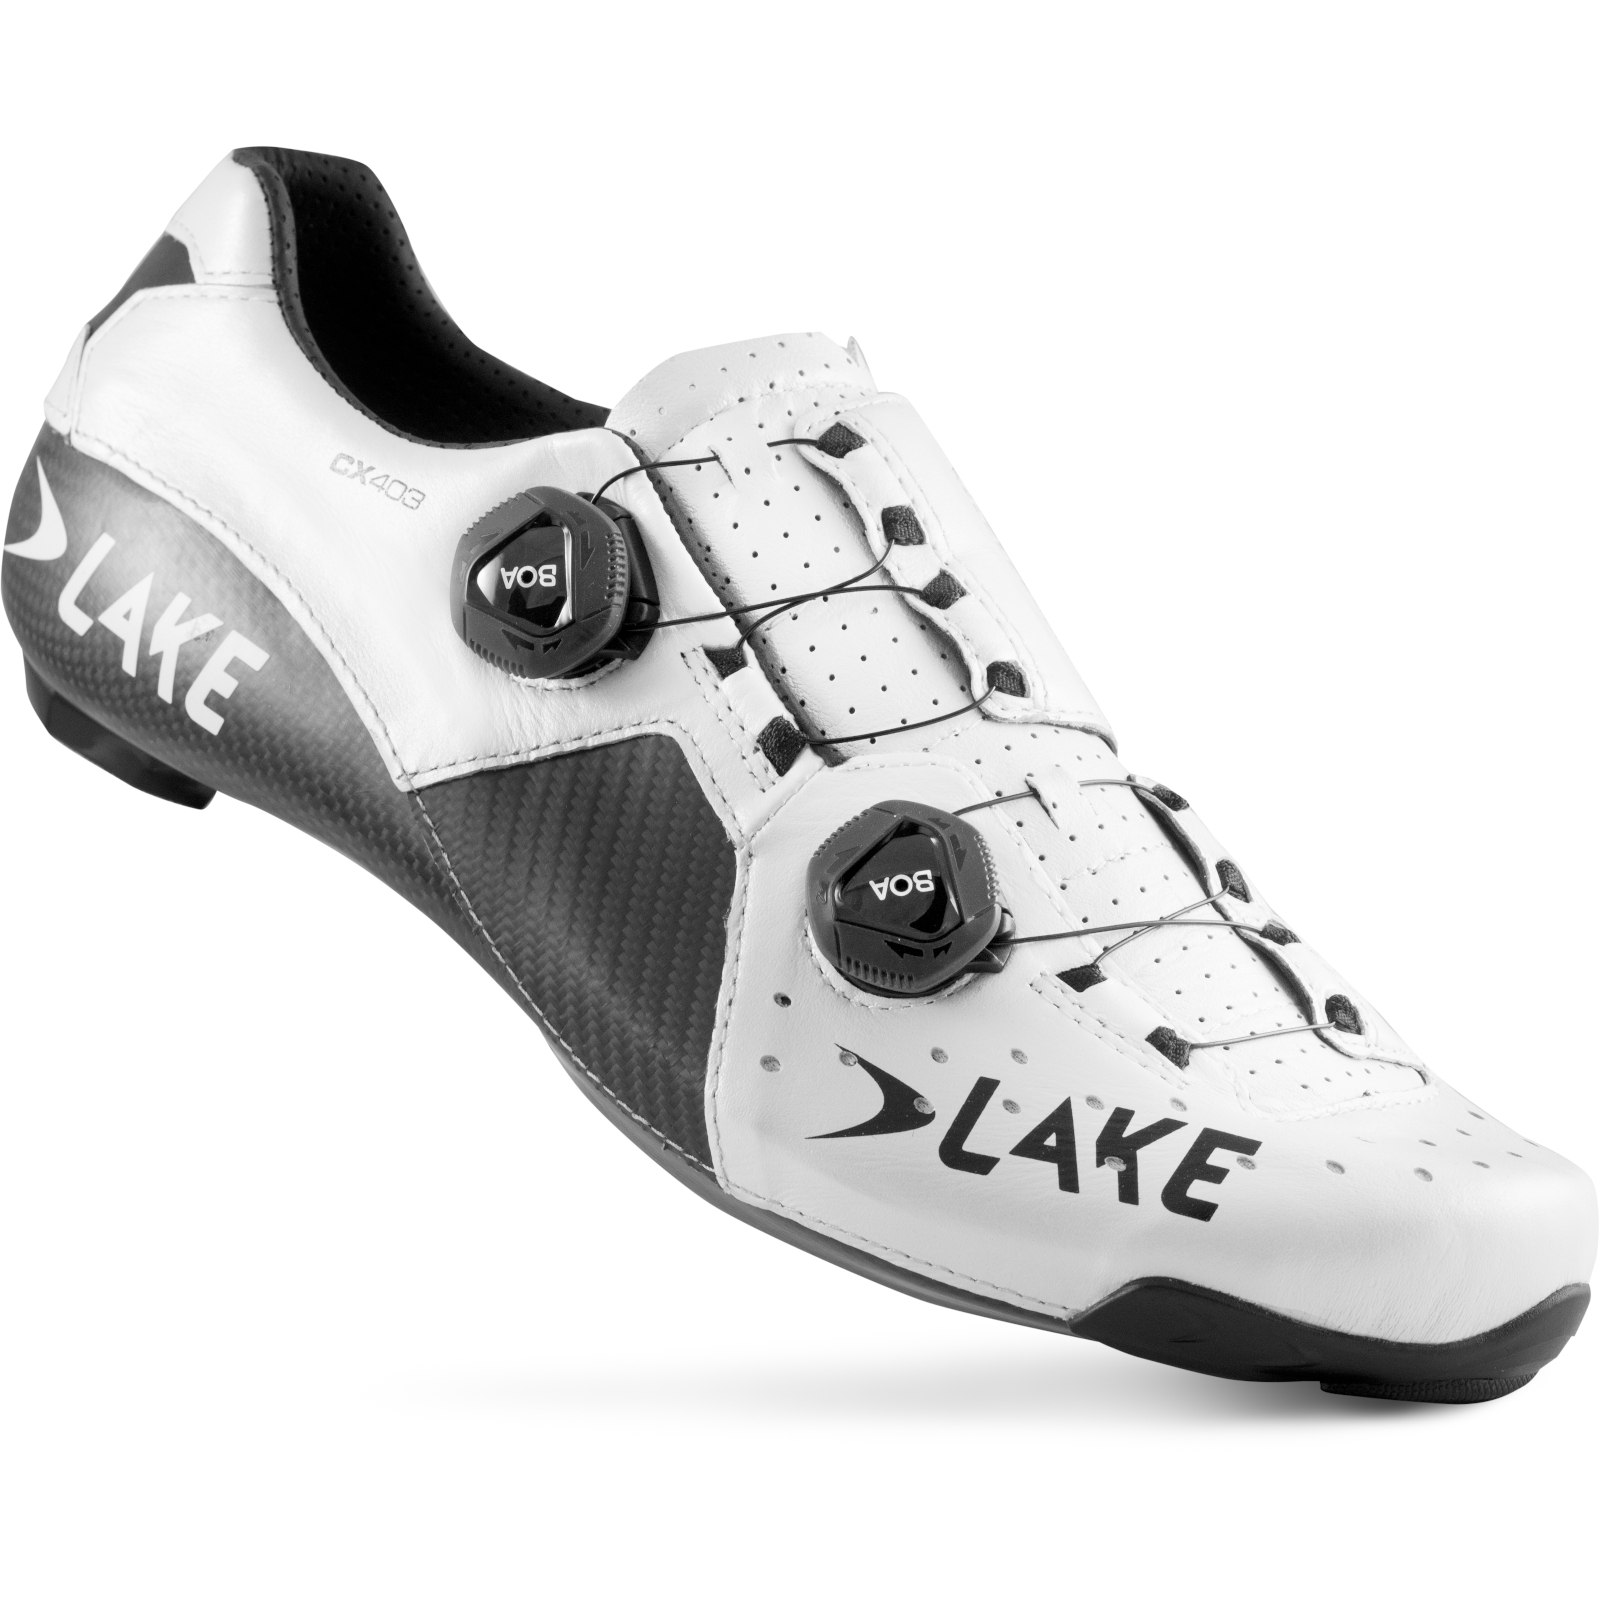 Picture of Lake CX403 Road Shoes - white/black